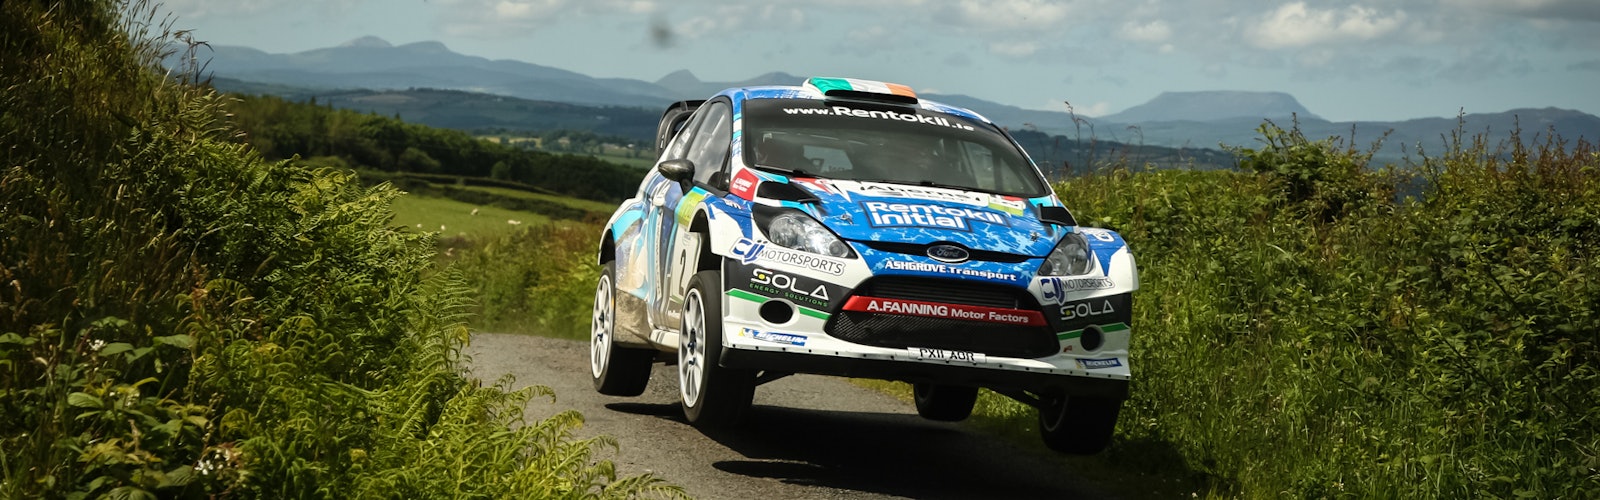 Craig Breen wants to win in Donegal. 2019 he took second, no doubt he’ll return again